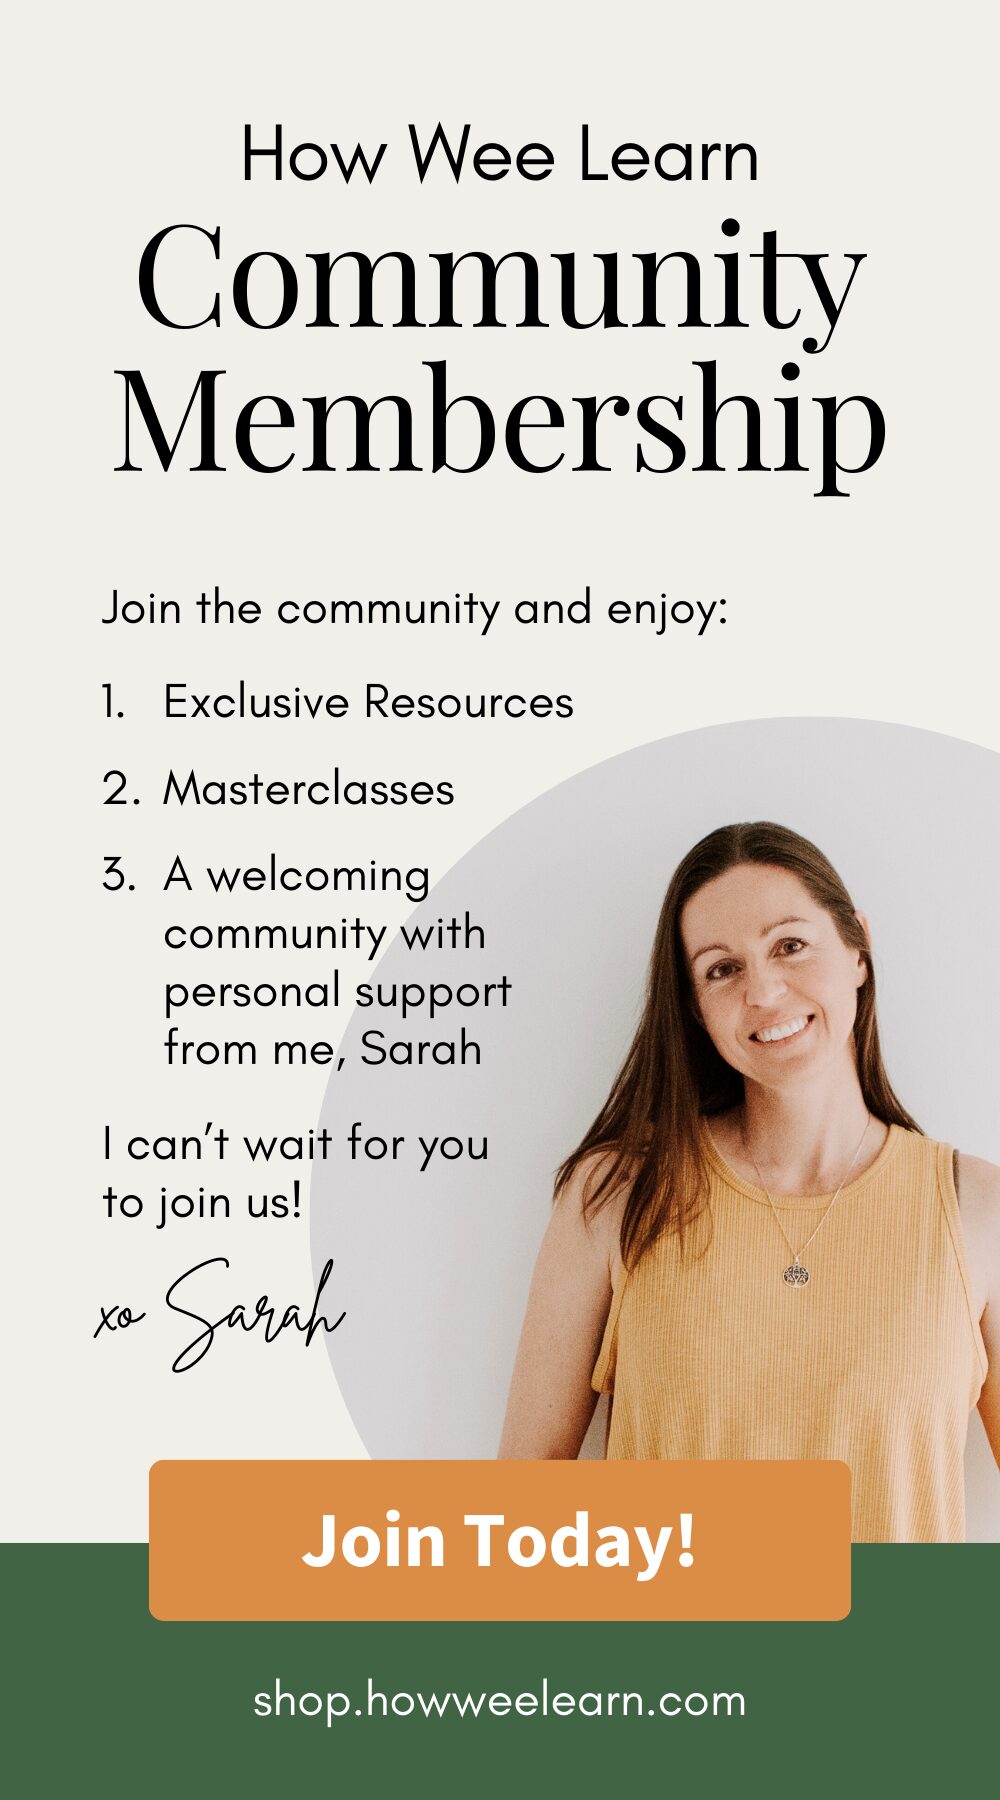 How Wee Learn Community Membership: Join Today!